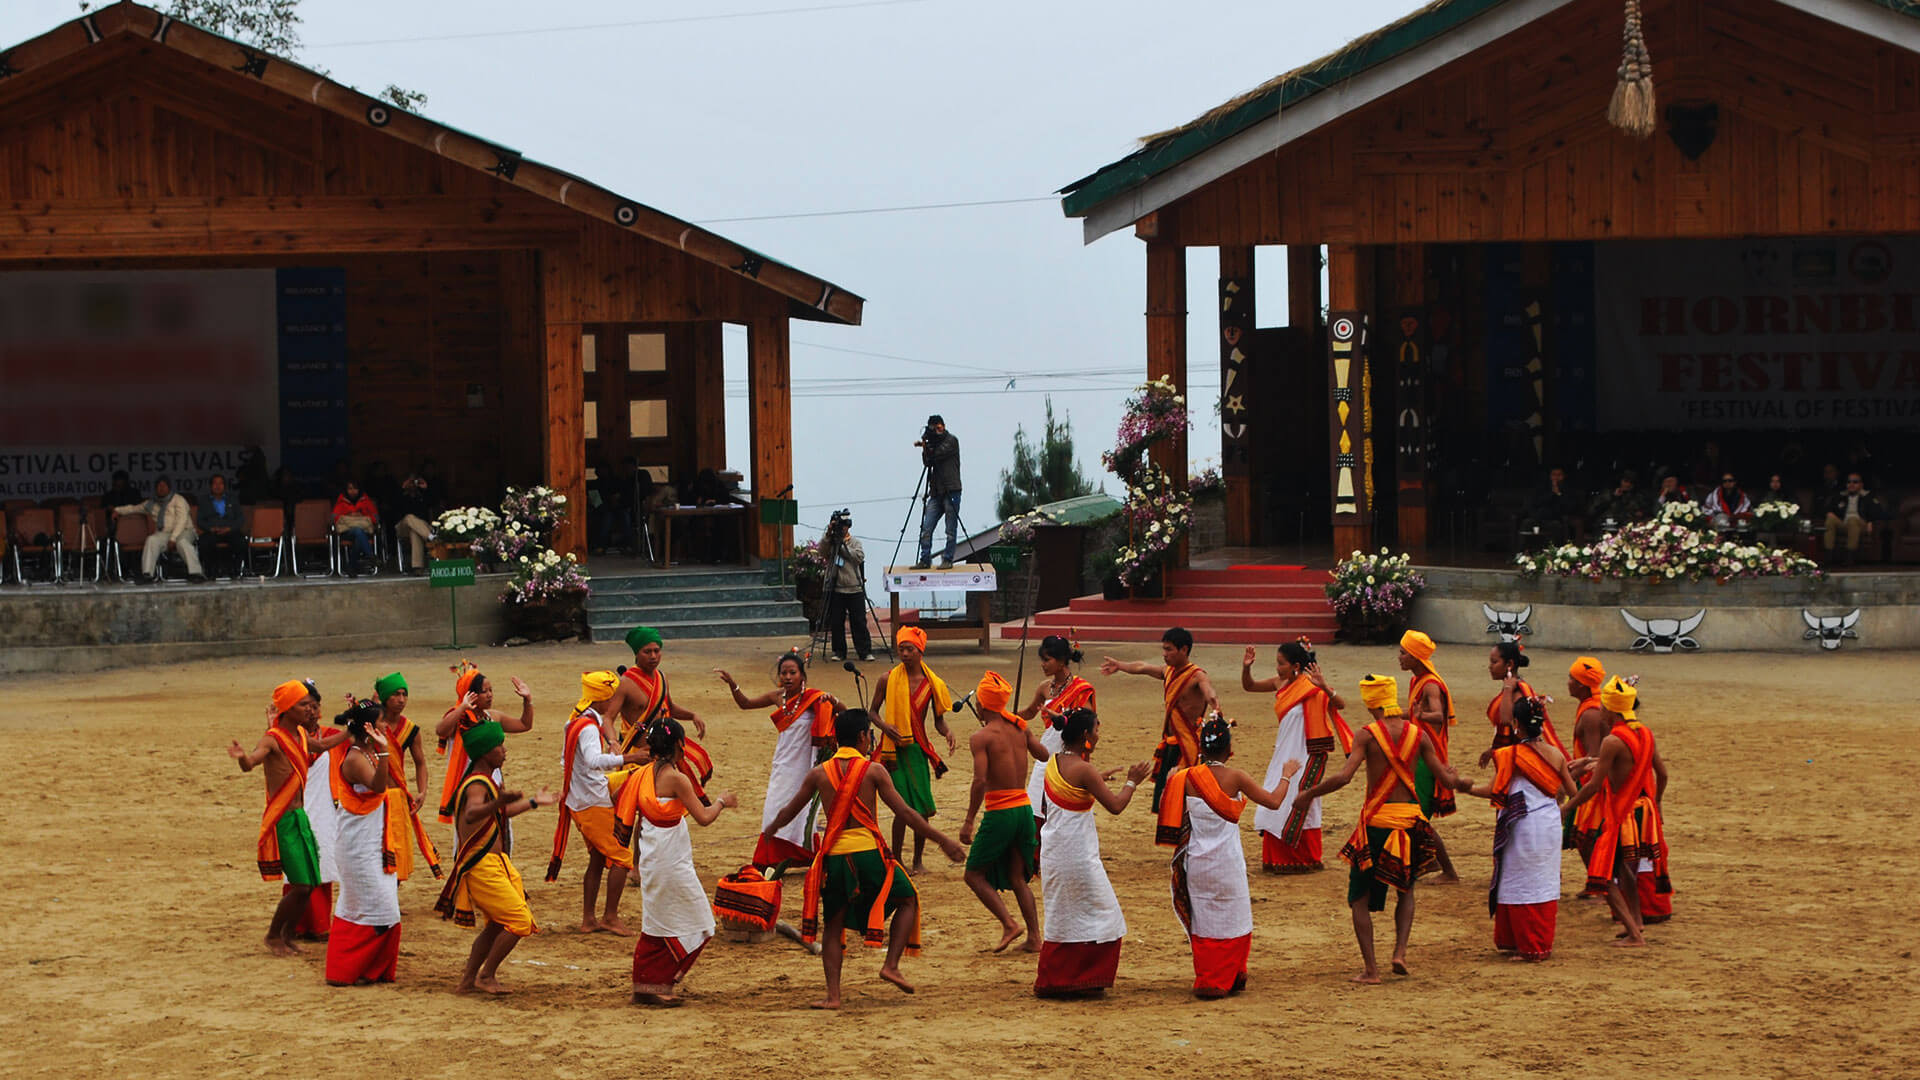 Tuluni is the festival of Nagaland